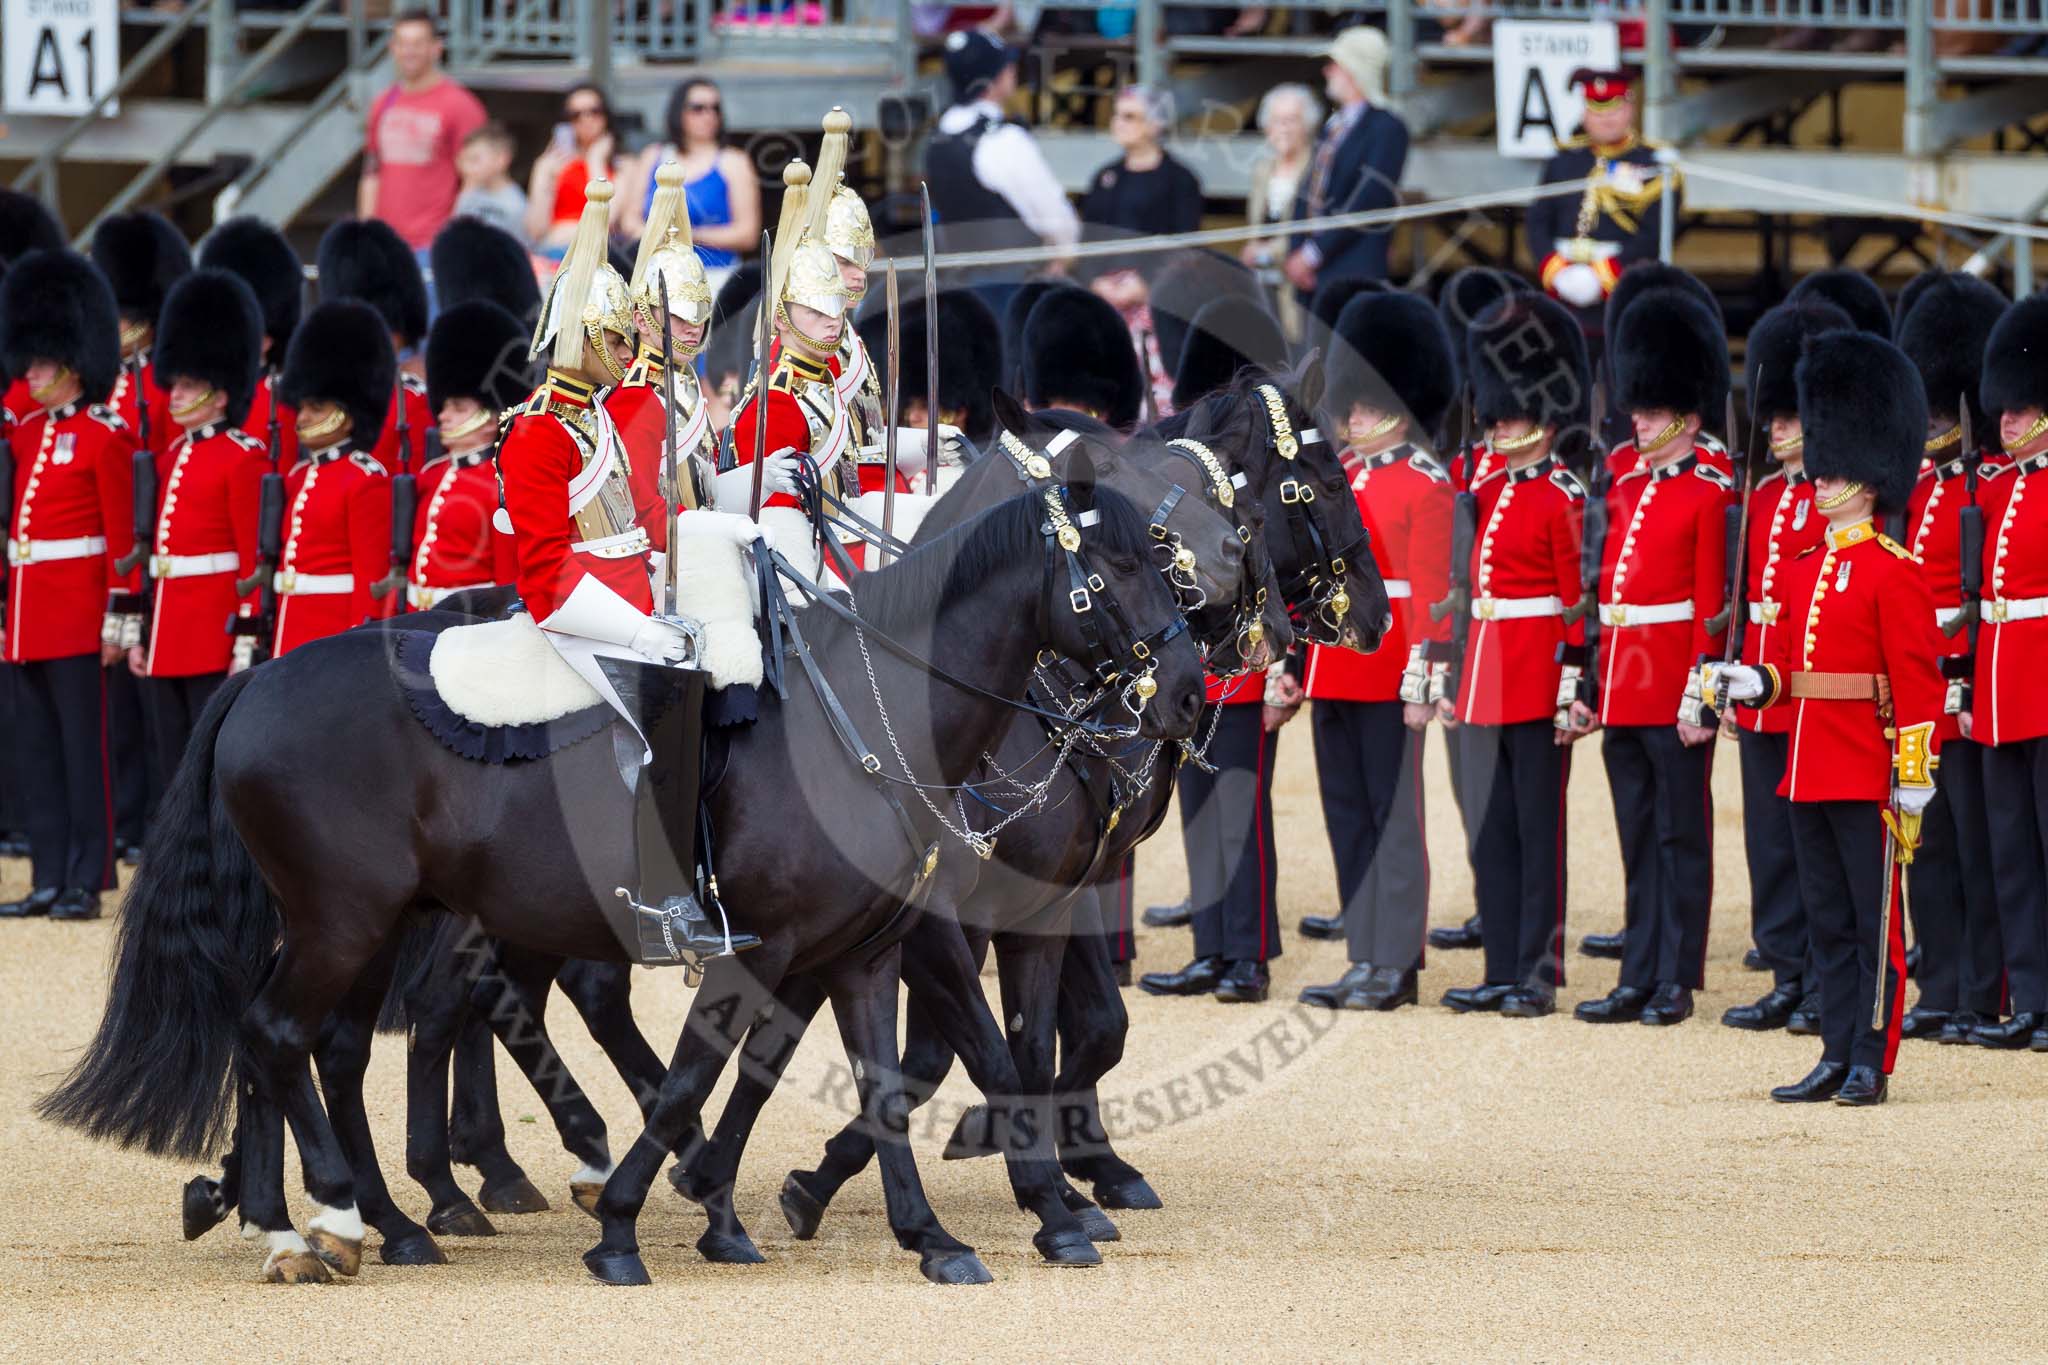 The Colonel's Review 2015.
Horse Guards Parade, Westminster,
London,

United Kingdom,
on 06 June 2015 at 11:02, image #215